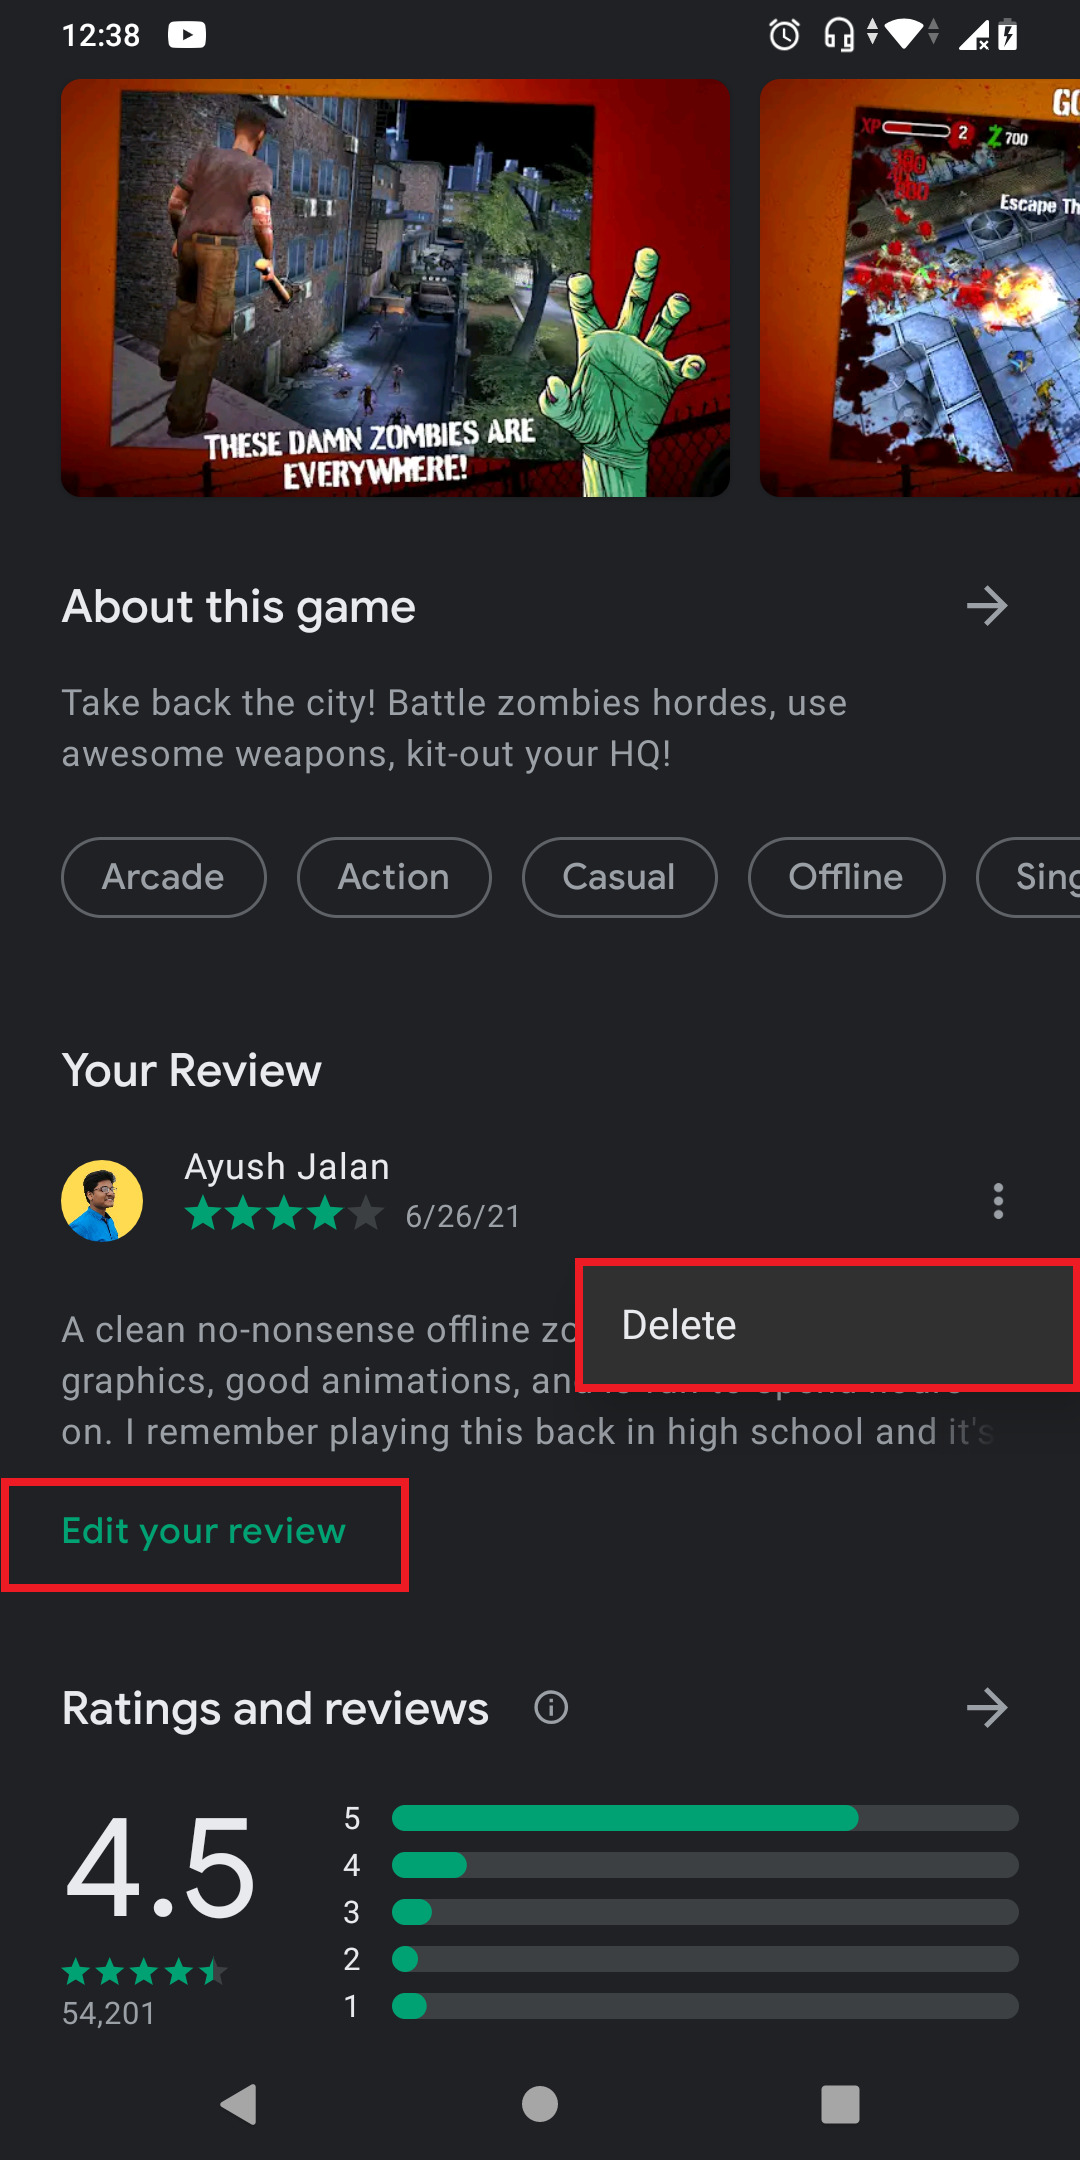 Google-Play-Store-edit-or-delete-a-review